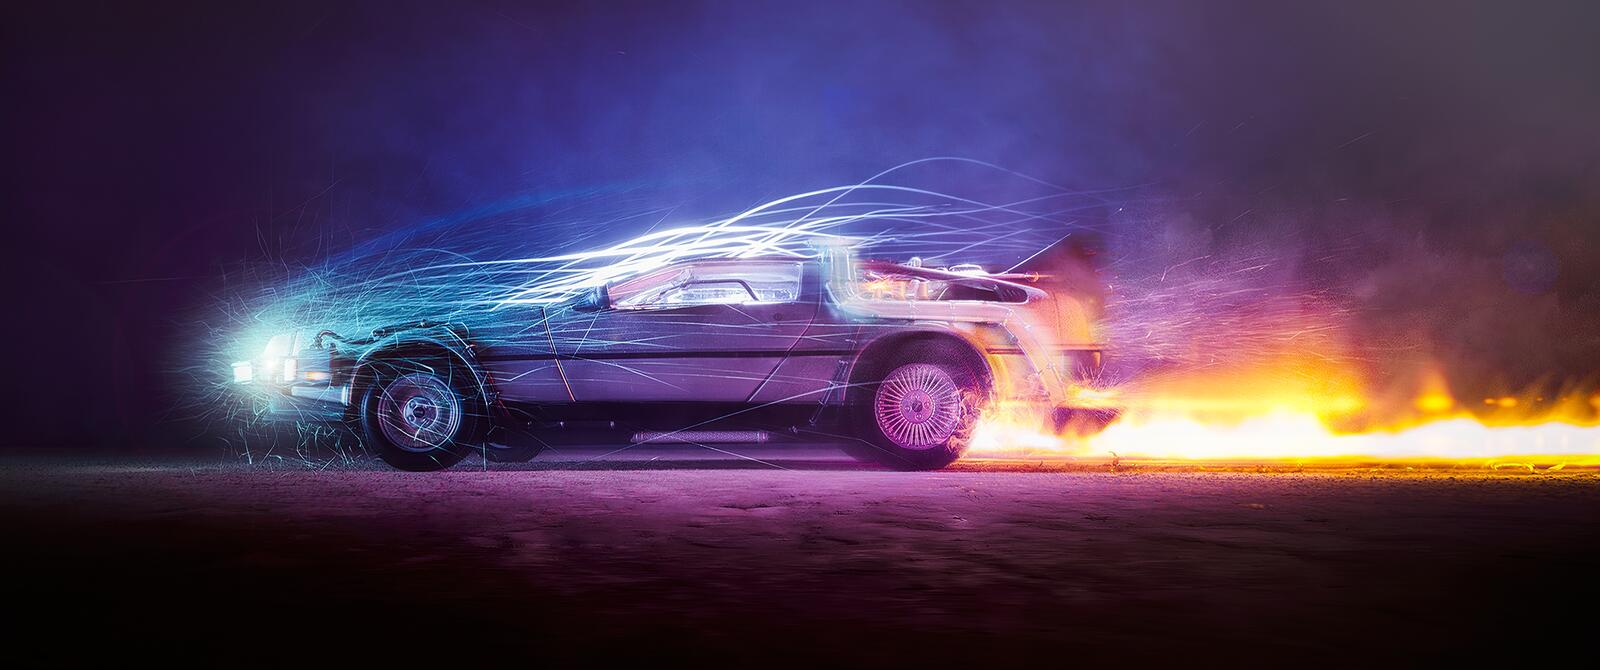 Wallpapers Car lights Flames Back to the future on the desktop